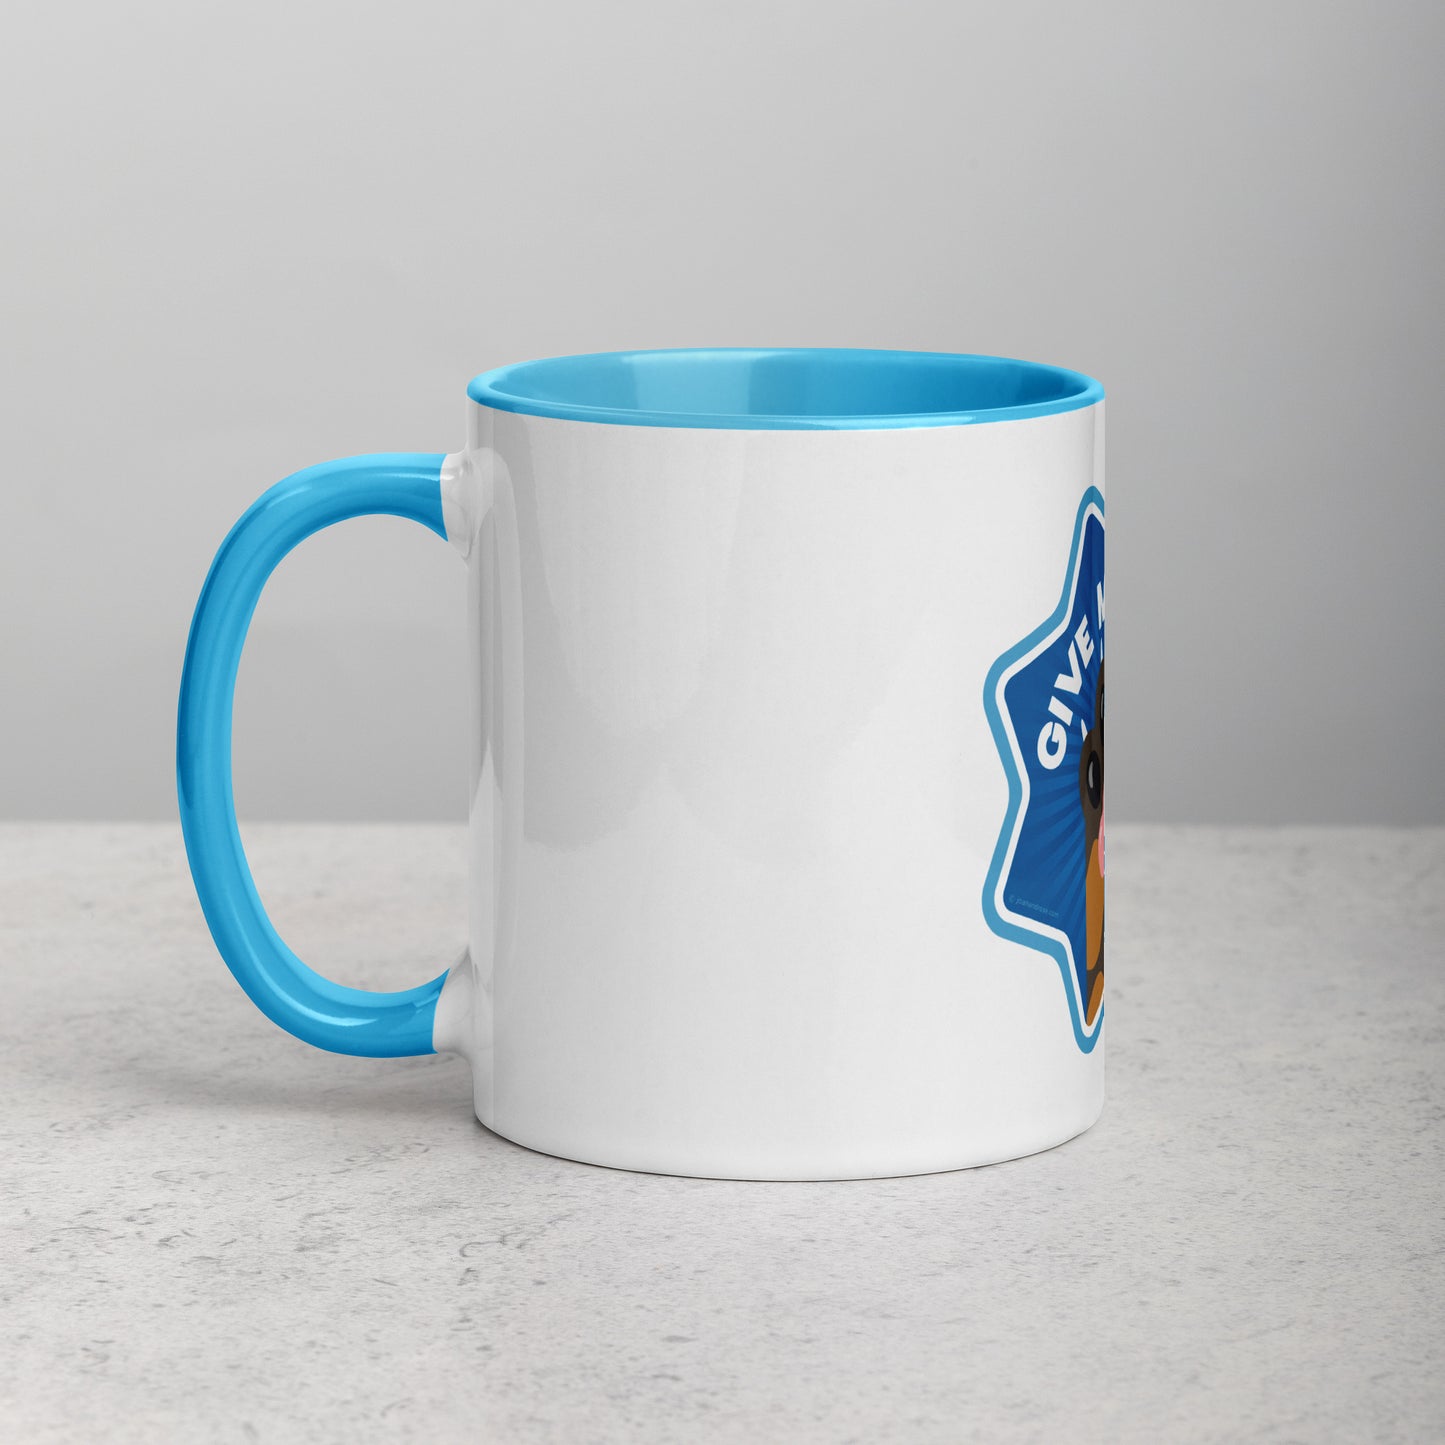 left hand facing image of a white mug with blue interior and handle. Mug has image of a tortoiseshell cats paw on a blue 8 sided star with the text 'give me four' 